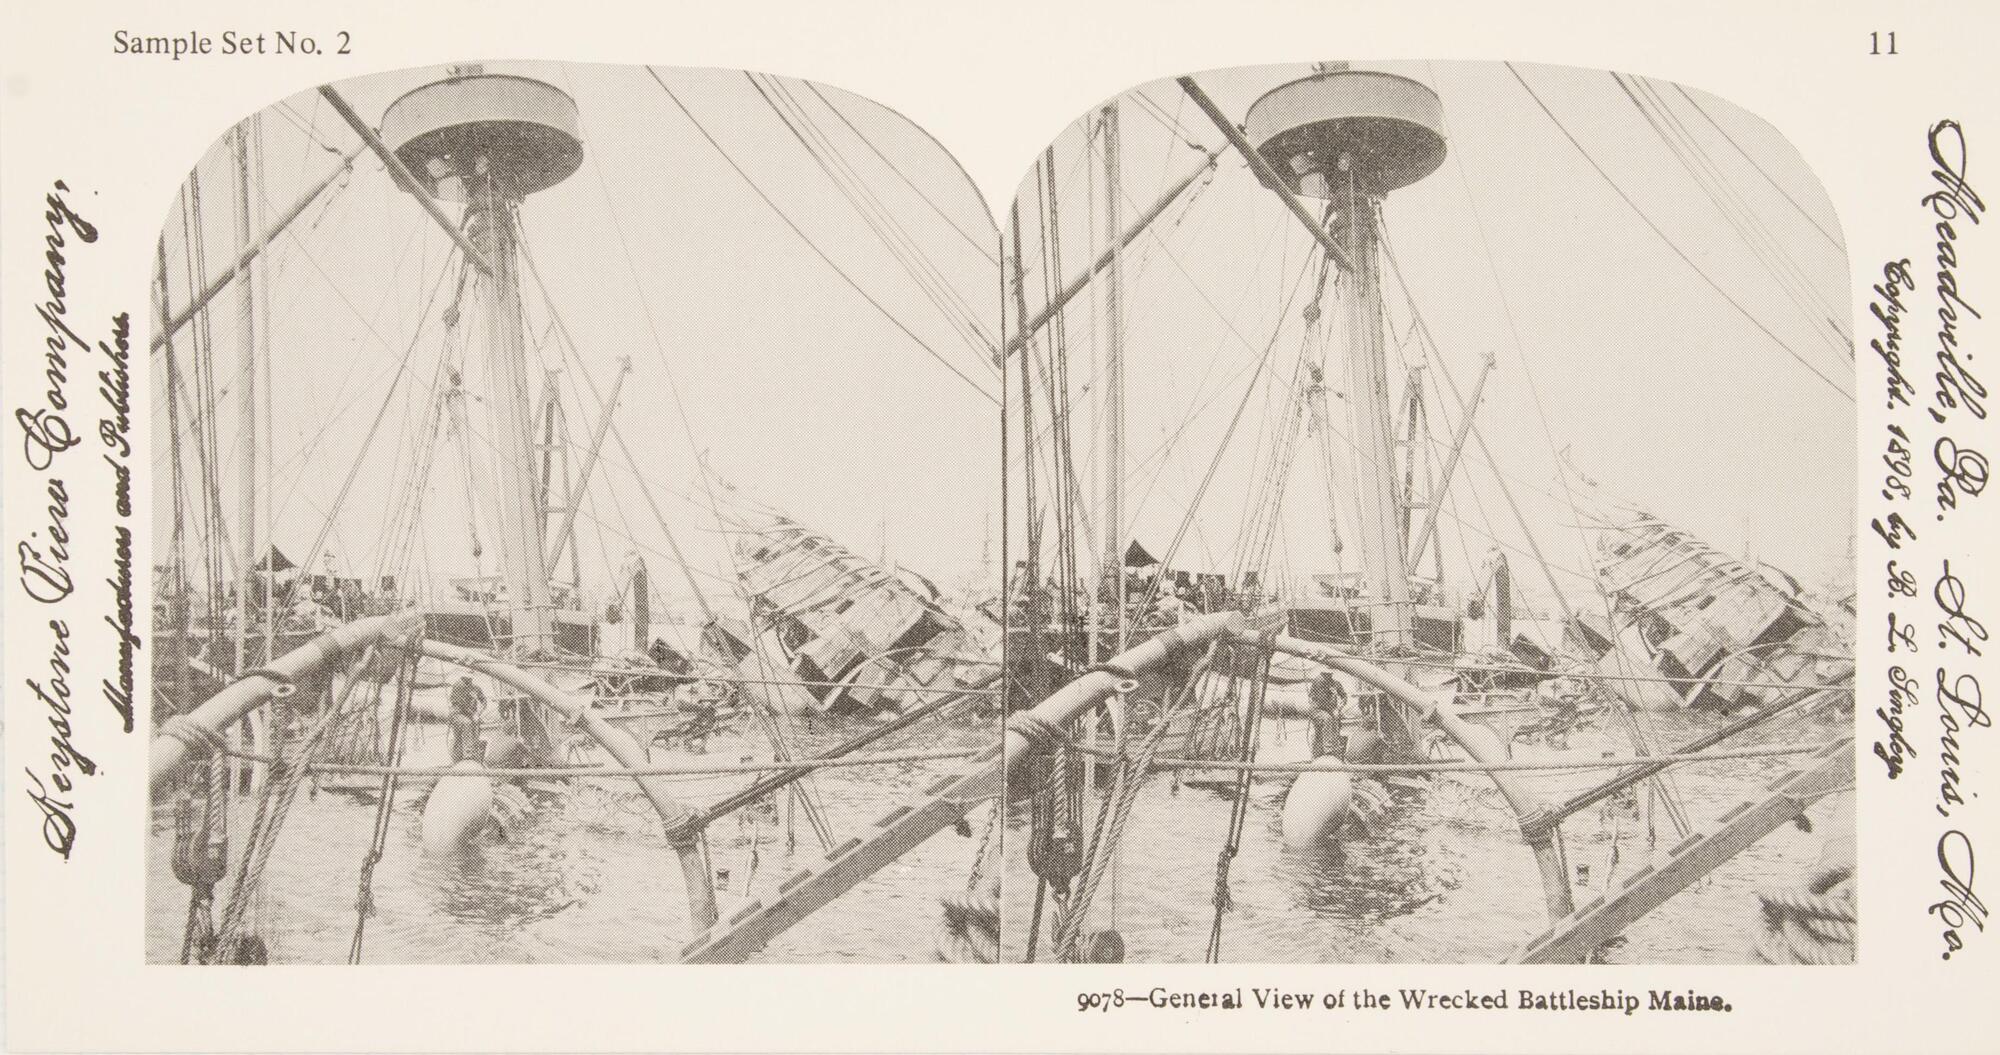 This black and white stereoscopic image features two images of a shipwreck. The majority of the ship is submerged in water and cords, ropes and debris are mostly visible. <br />